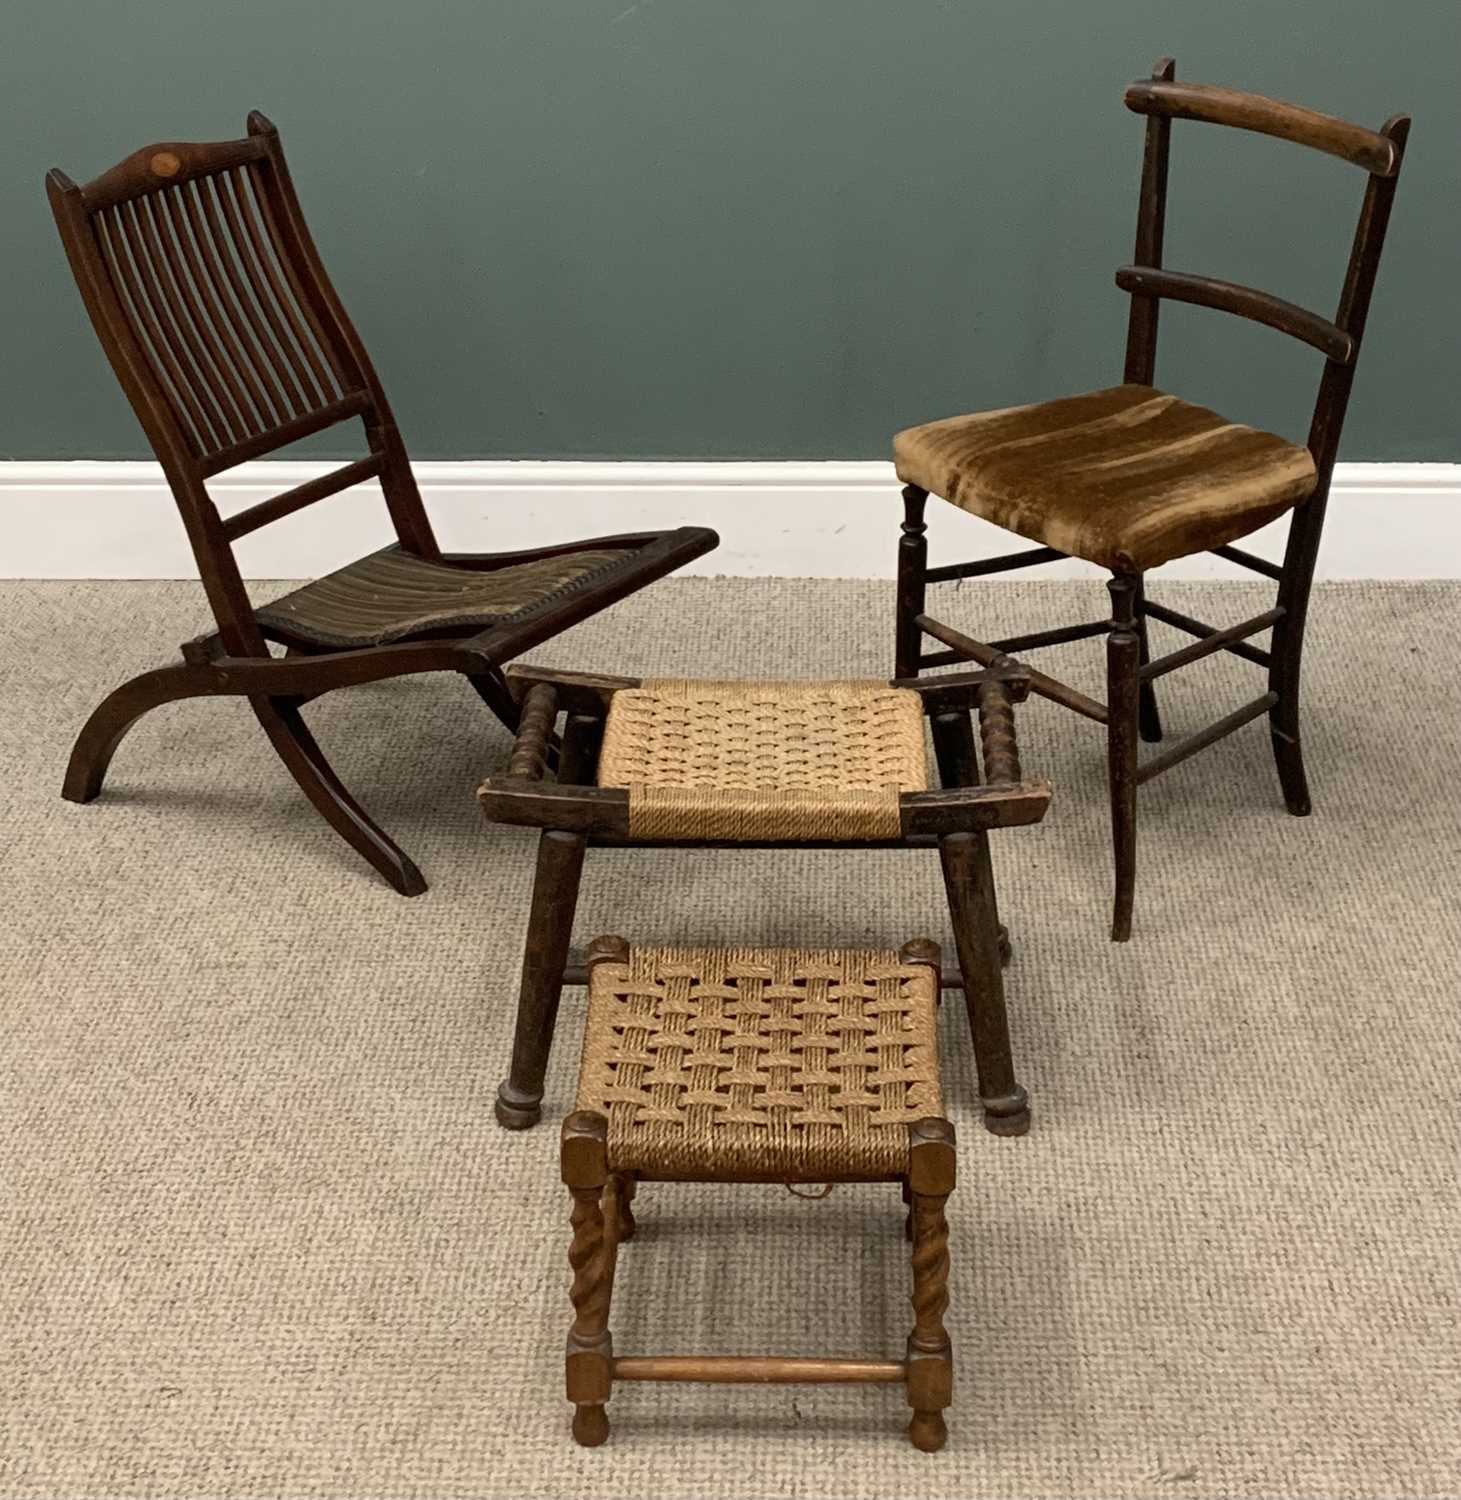 VINTAGE CHAIRS & STOOLS including two string topped stools and a folding chair Provenance: Private